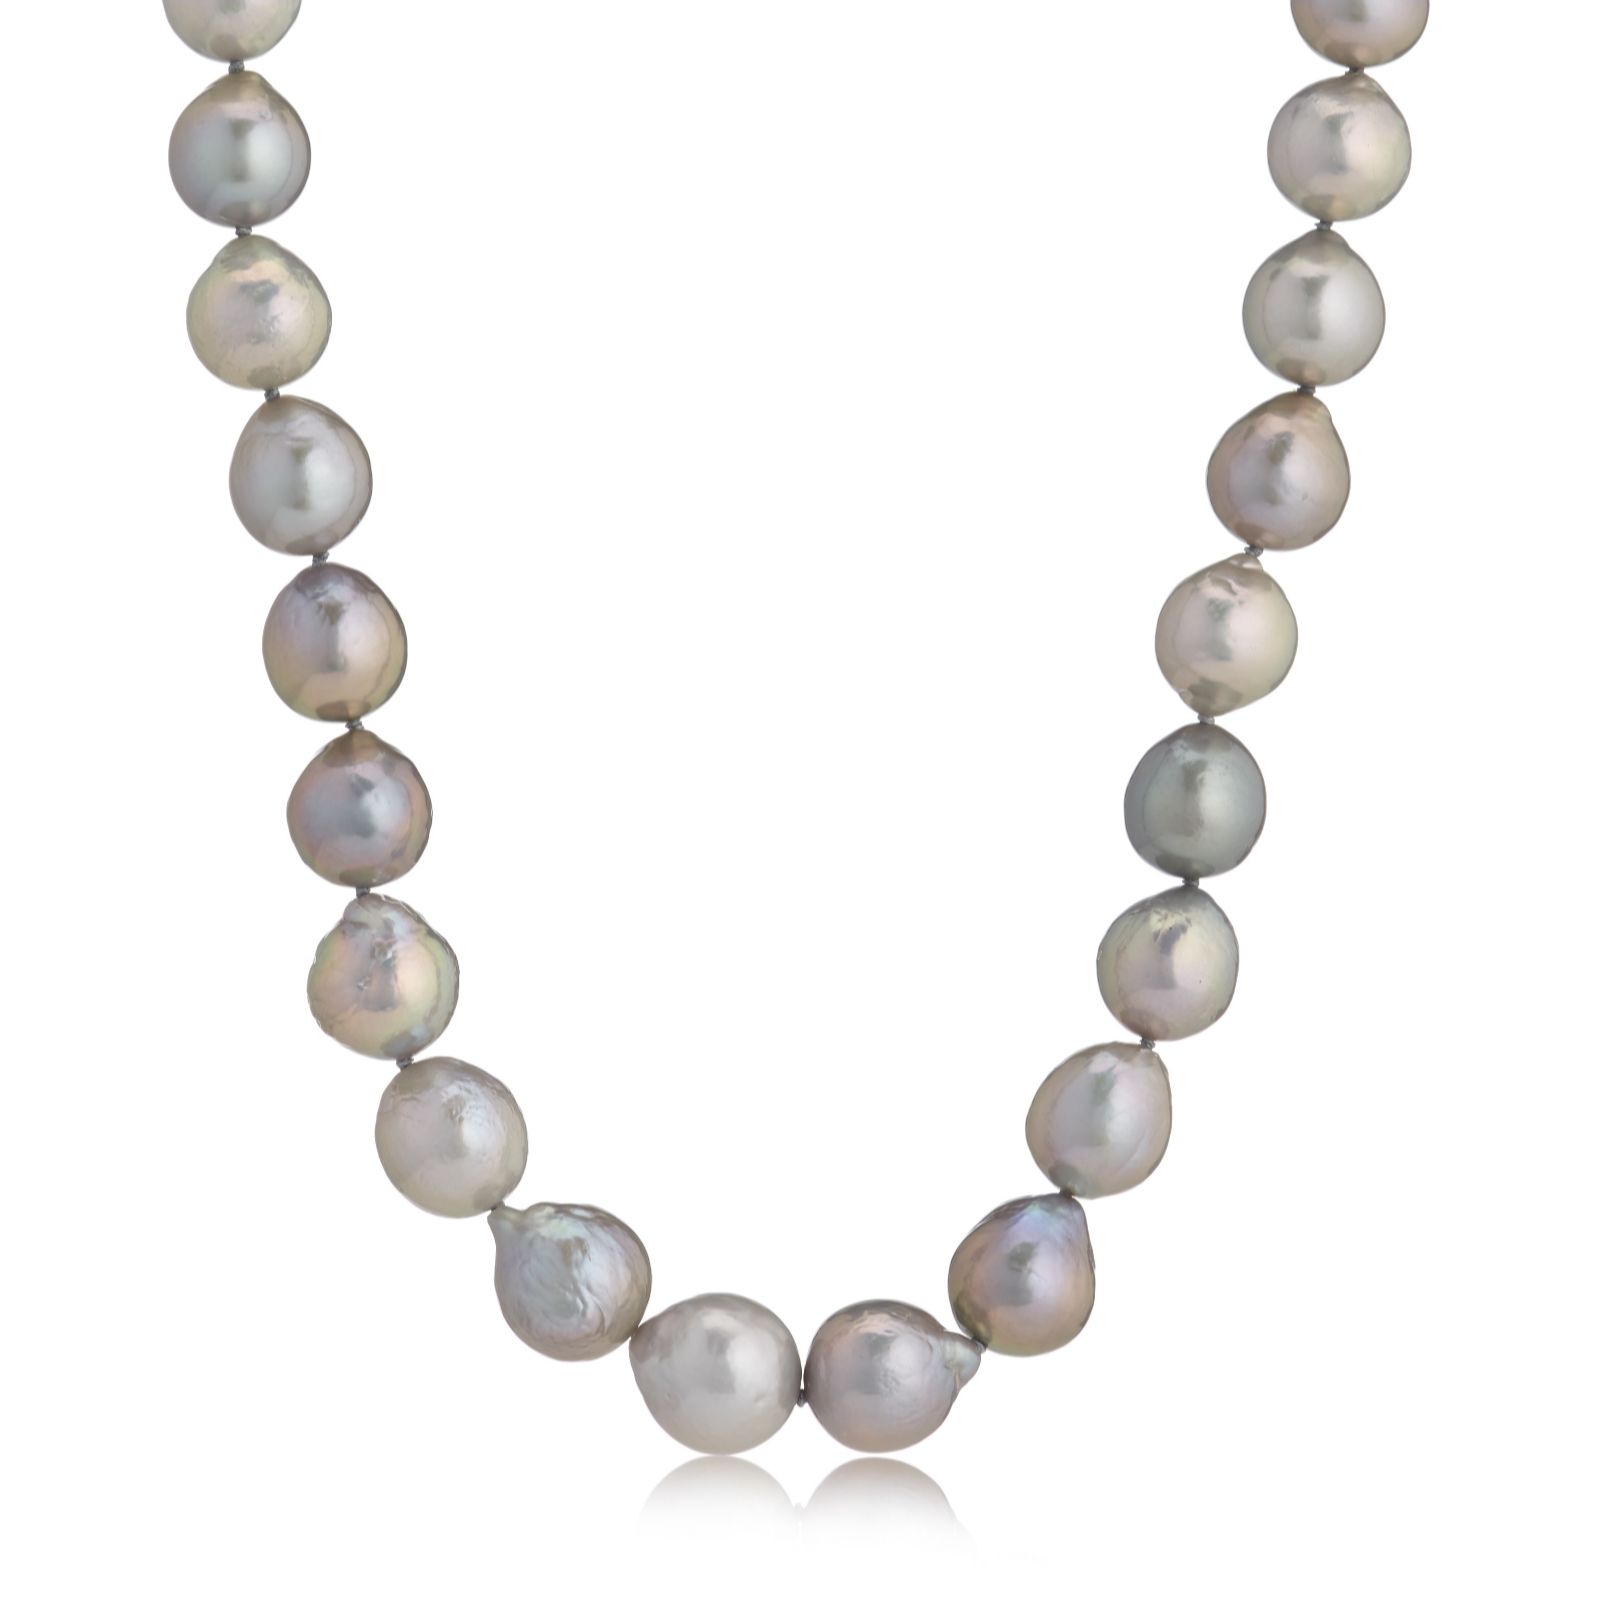 Lara Pearl 10-13mm Ming Baroque Strand 50cm Necklace Sterling Silver ...